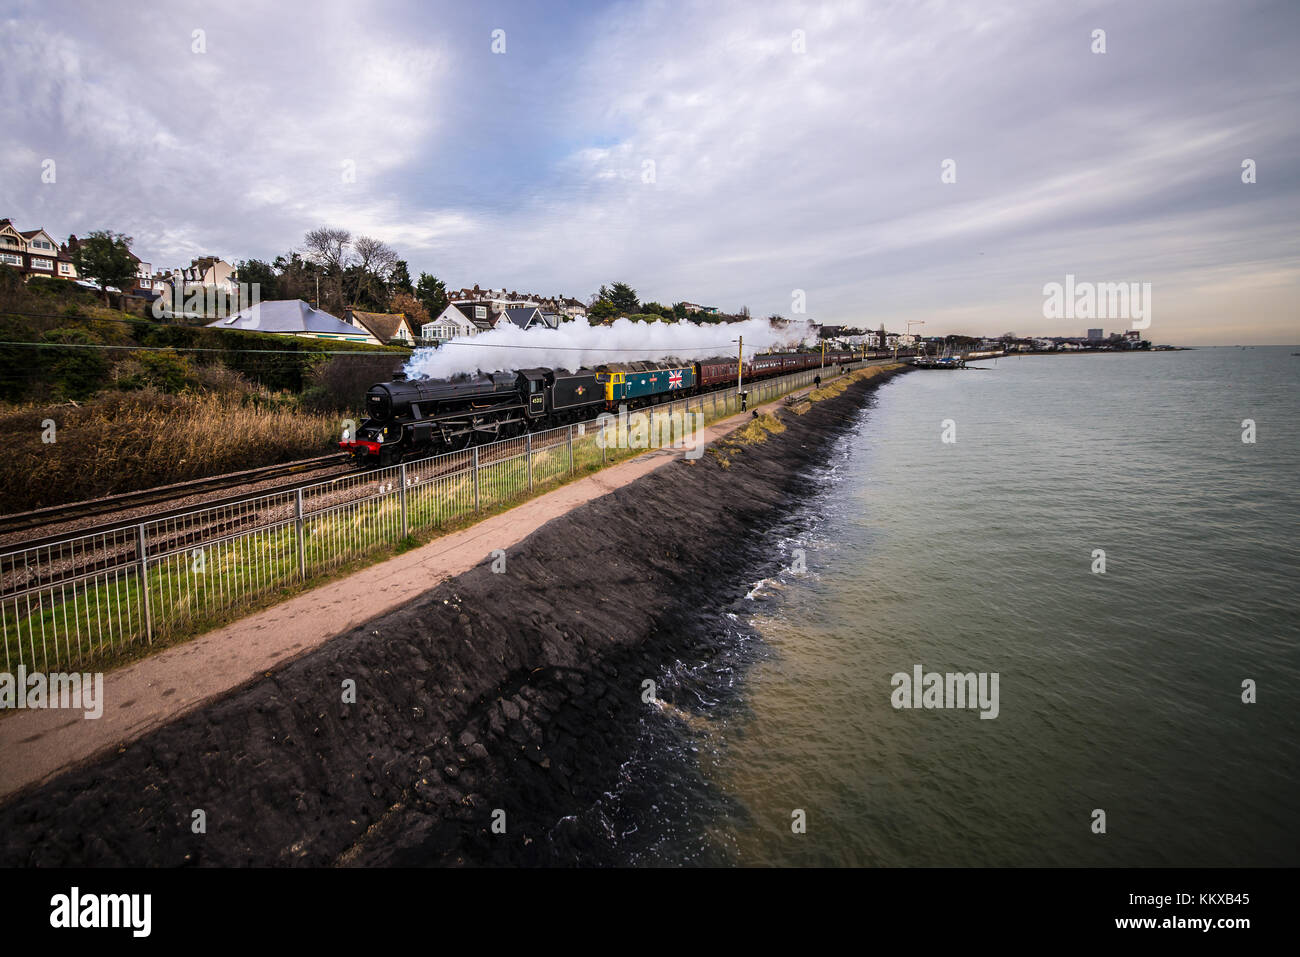 LMS Stanier Black Five 45212 with a vintage diesel class 47 named 'County of Essex' pulling Steam Dreams special train passing Chalkwell Beach on the Thames Estuary Stock Photo